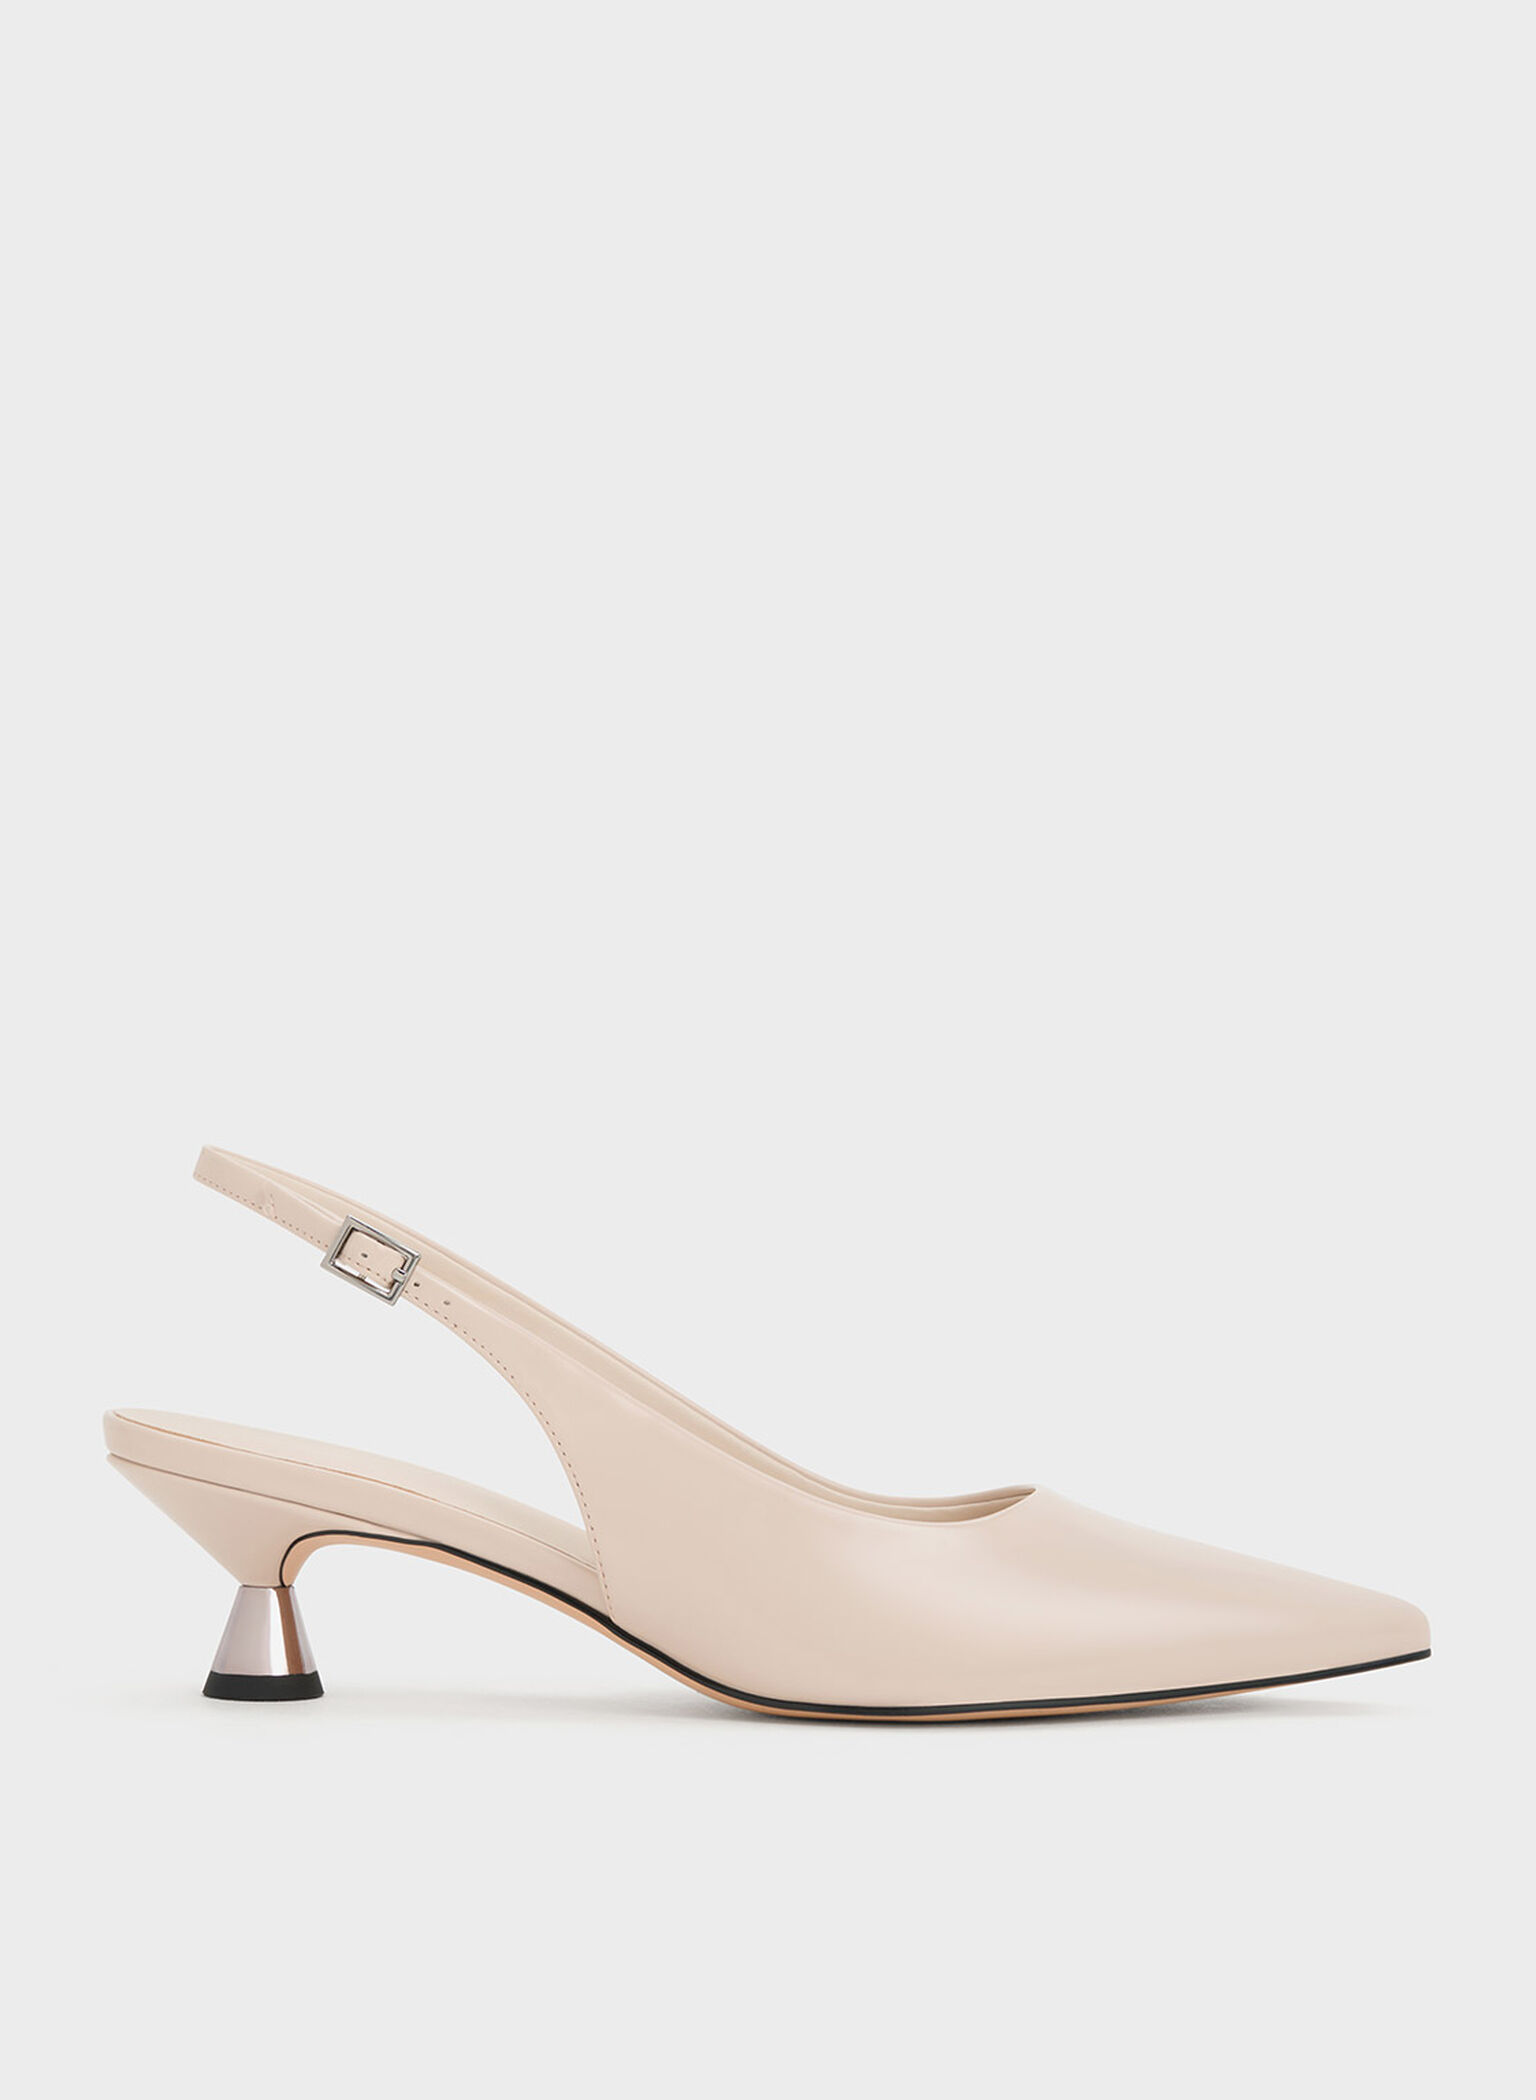 Charles & Keith Women's Patent Slingback Pumps